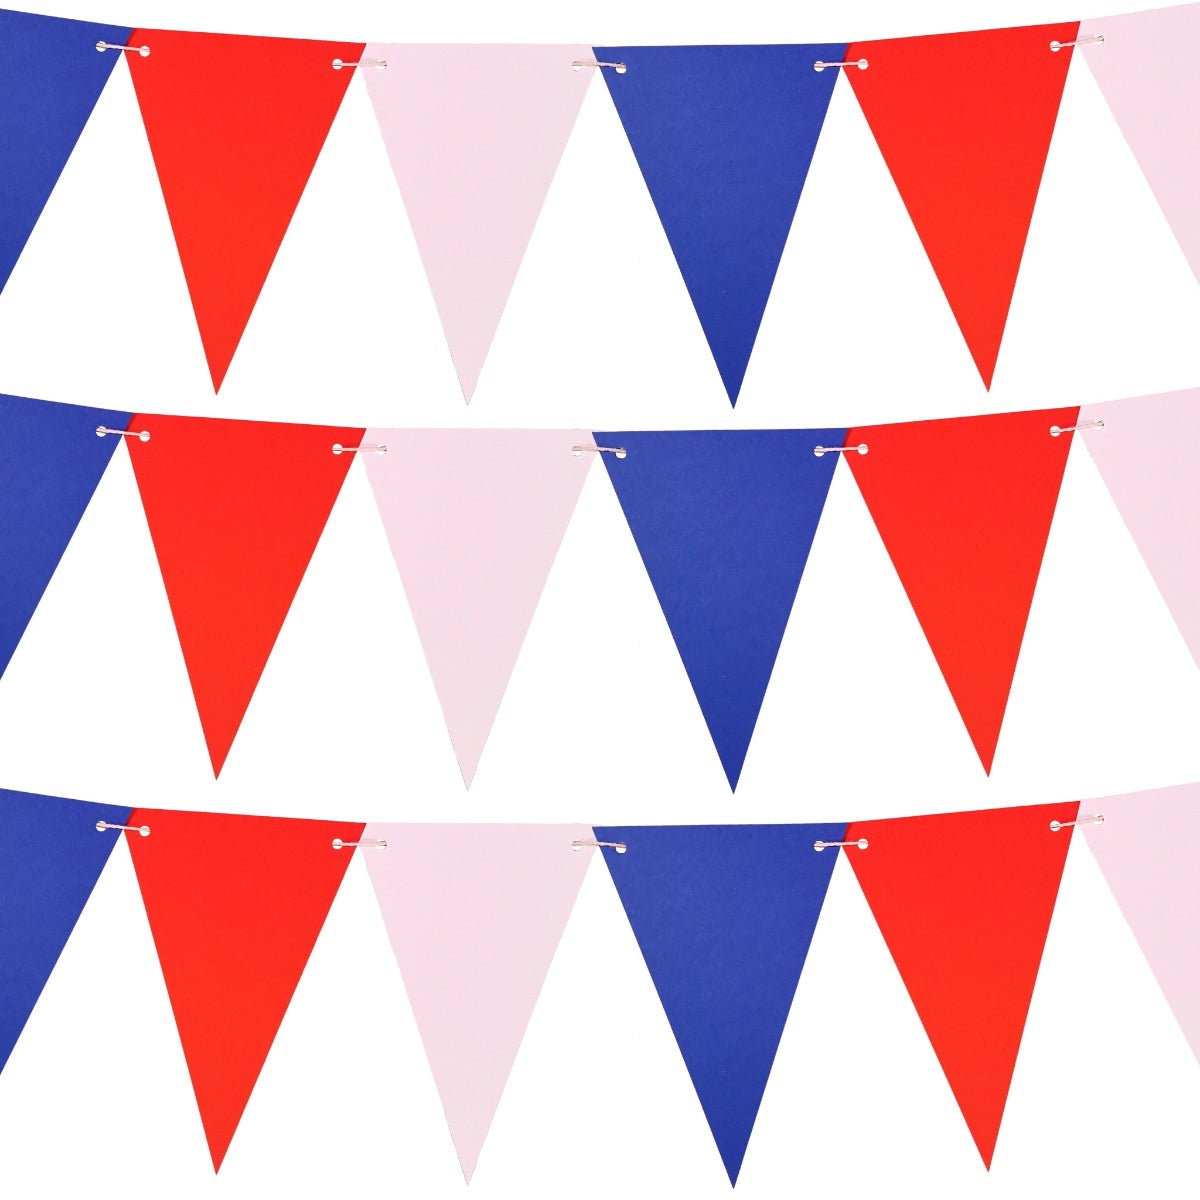 Jubilee Bunting Flags With String